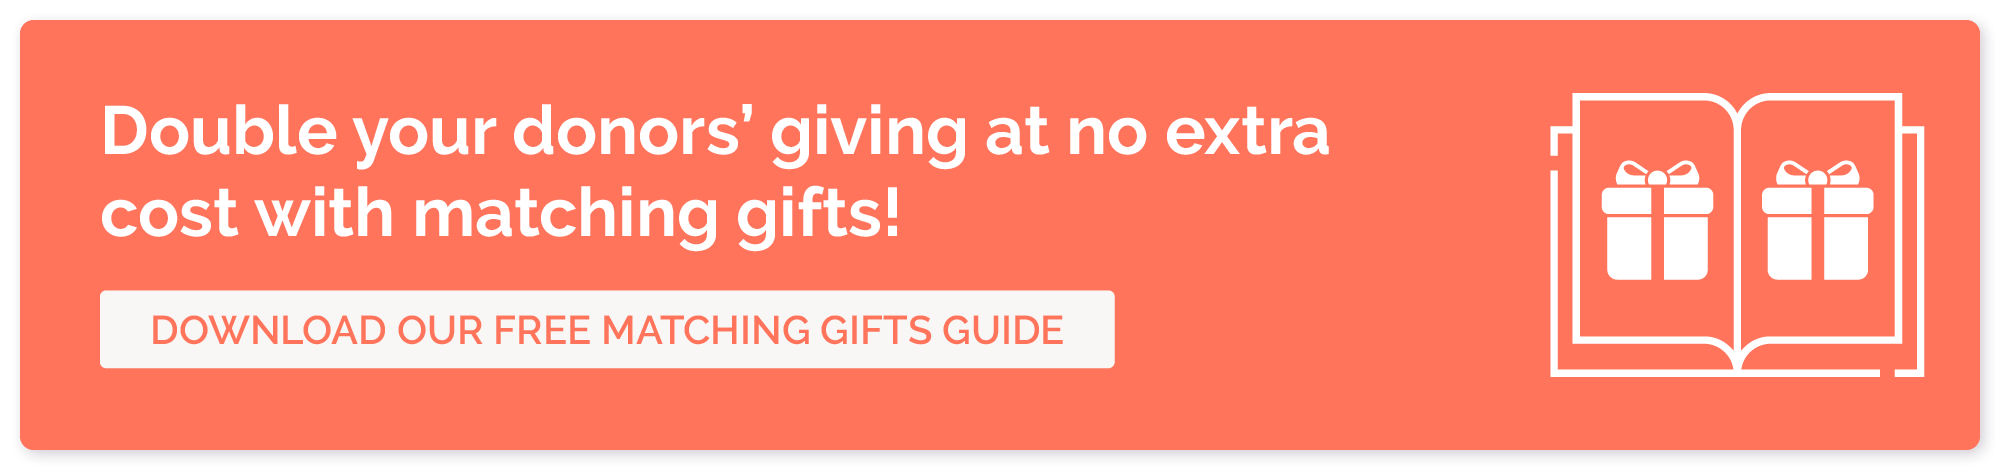 Double your donors' giving at no extra cost with matching gifts! Download our free matching gifts guide.